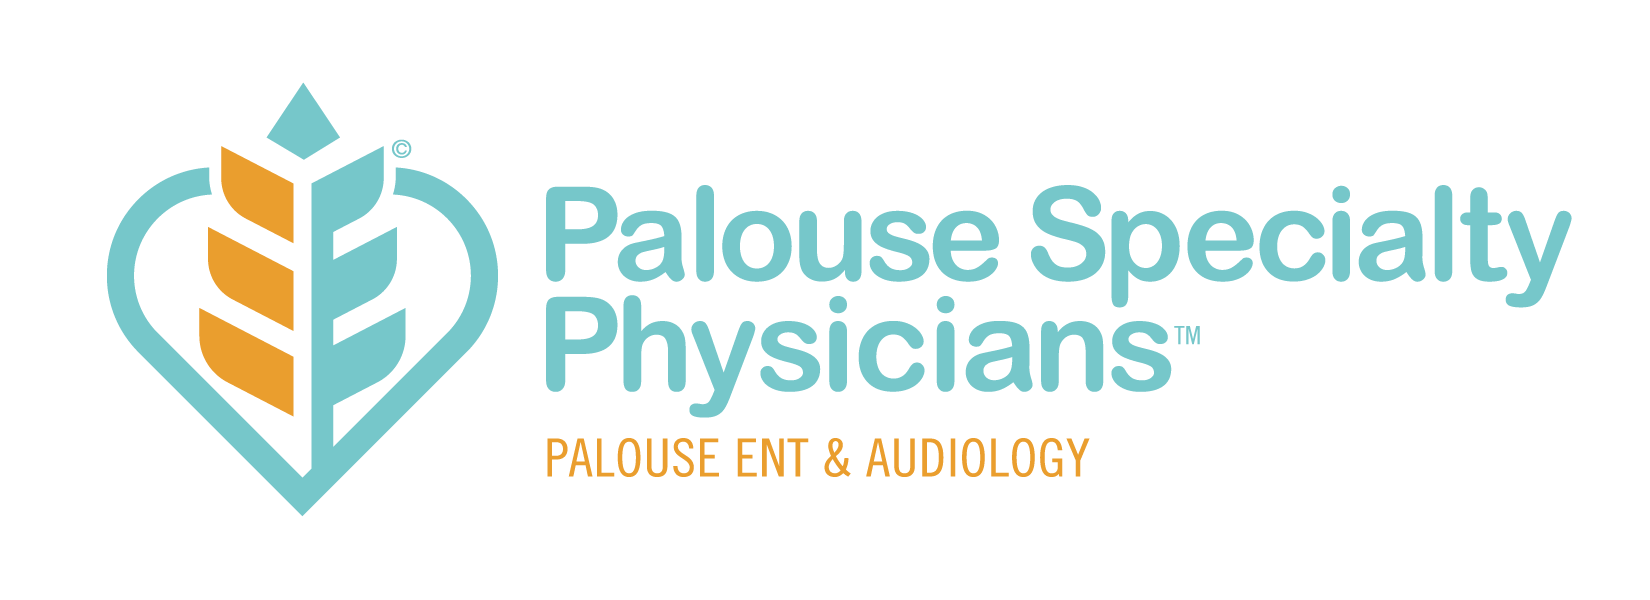 Palouse Specialty Physicians